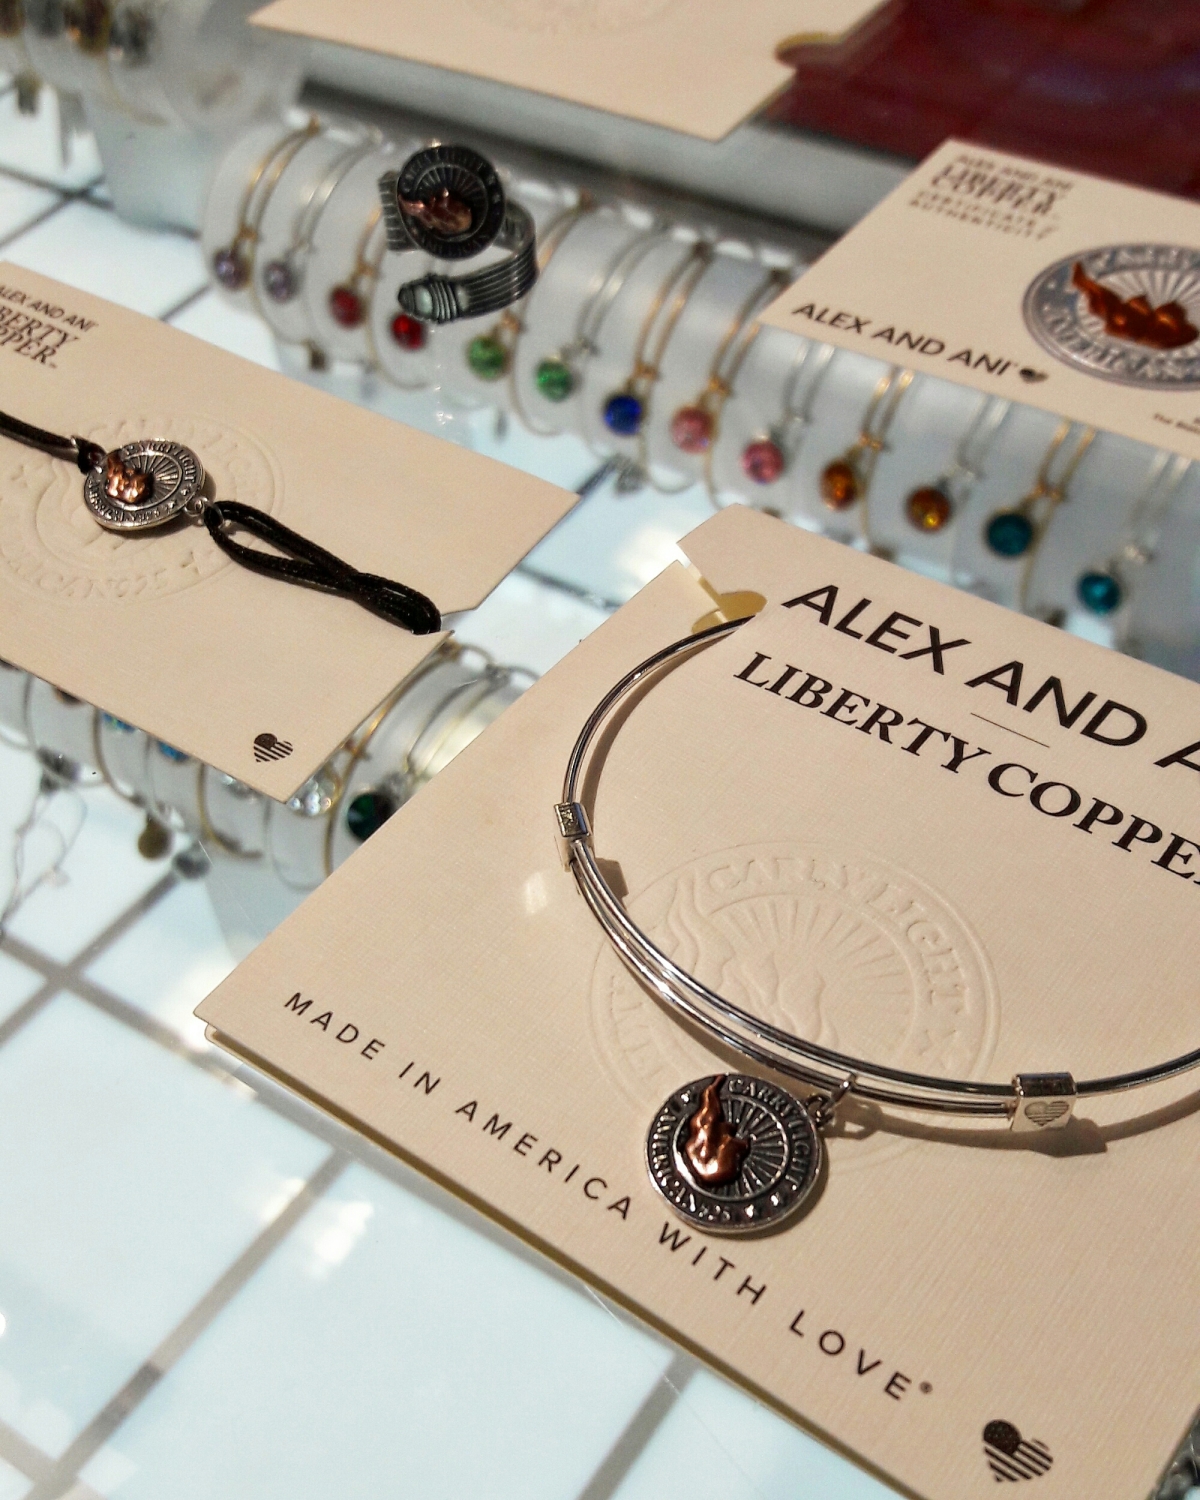 Liberty Copper #CarryLight collection launch from Alex and Ani